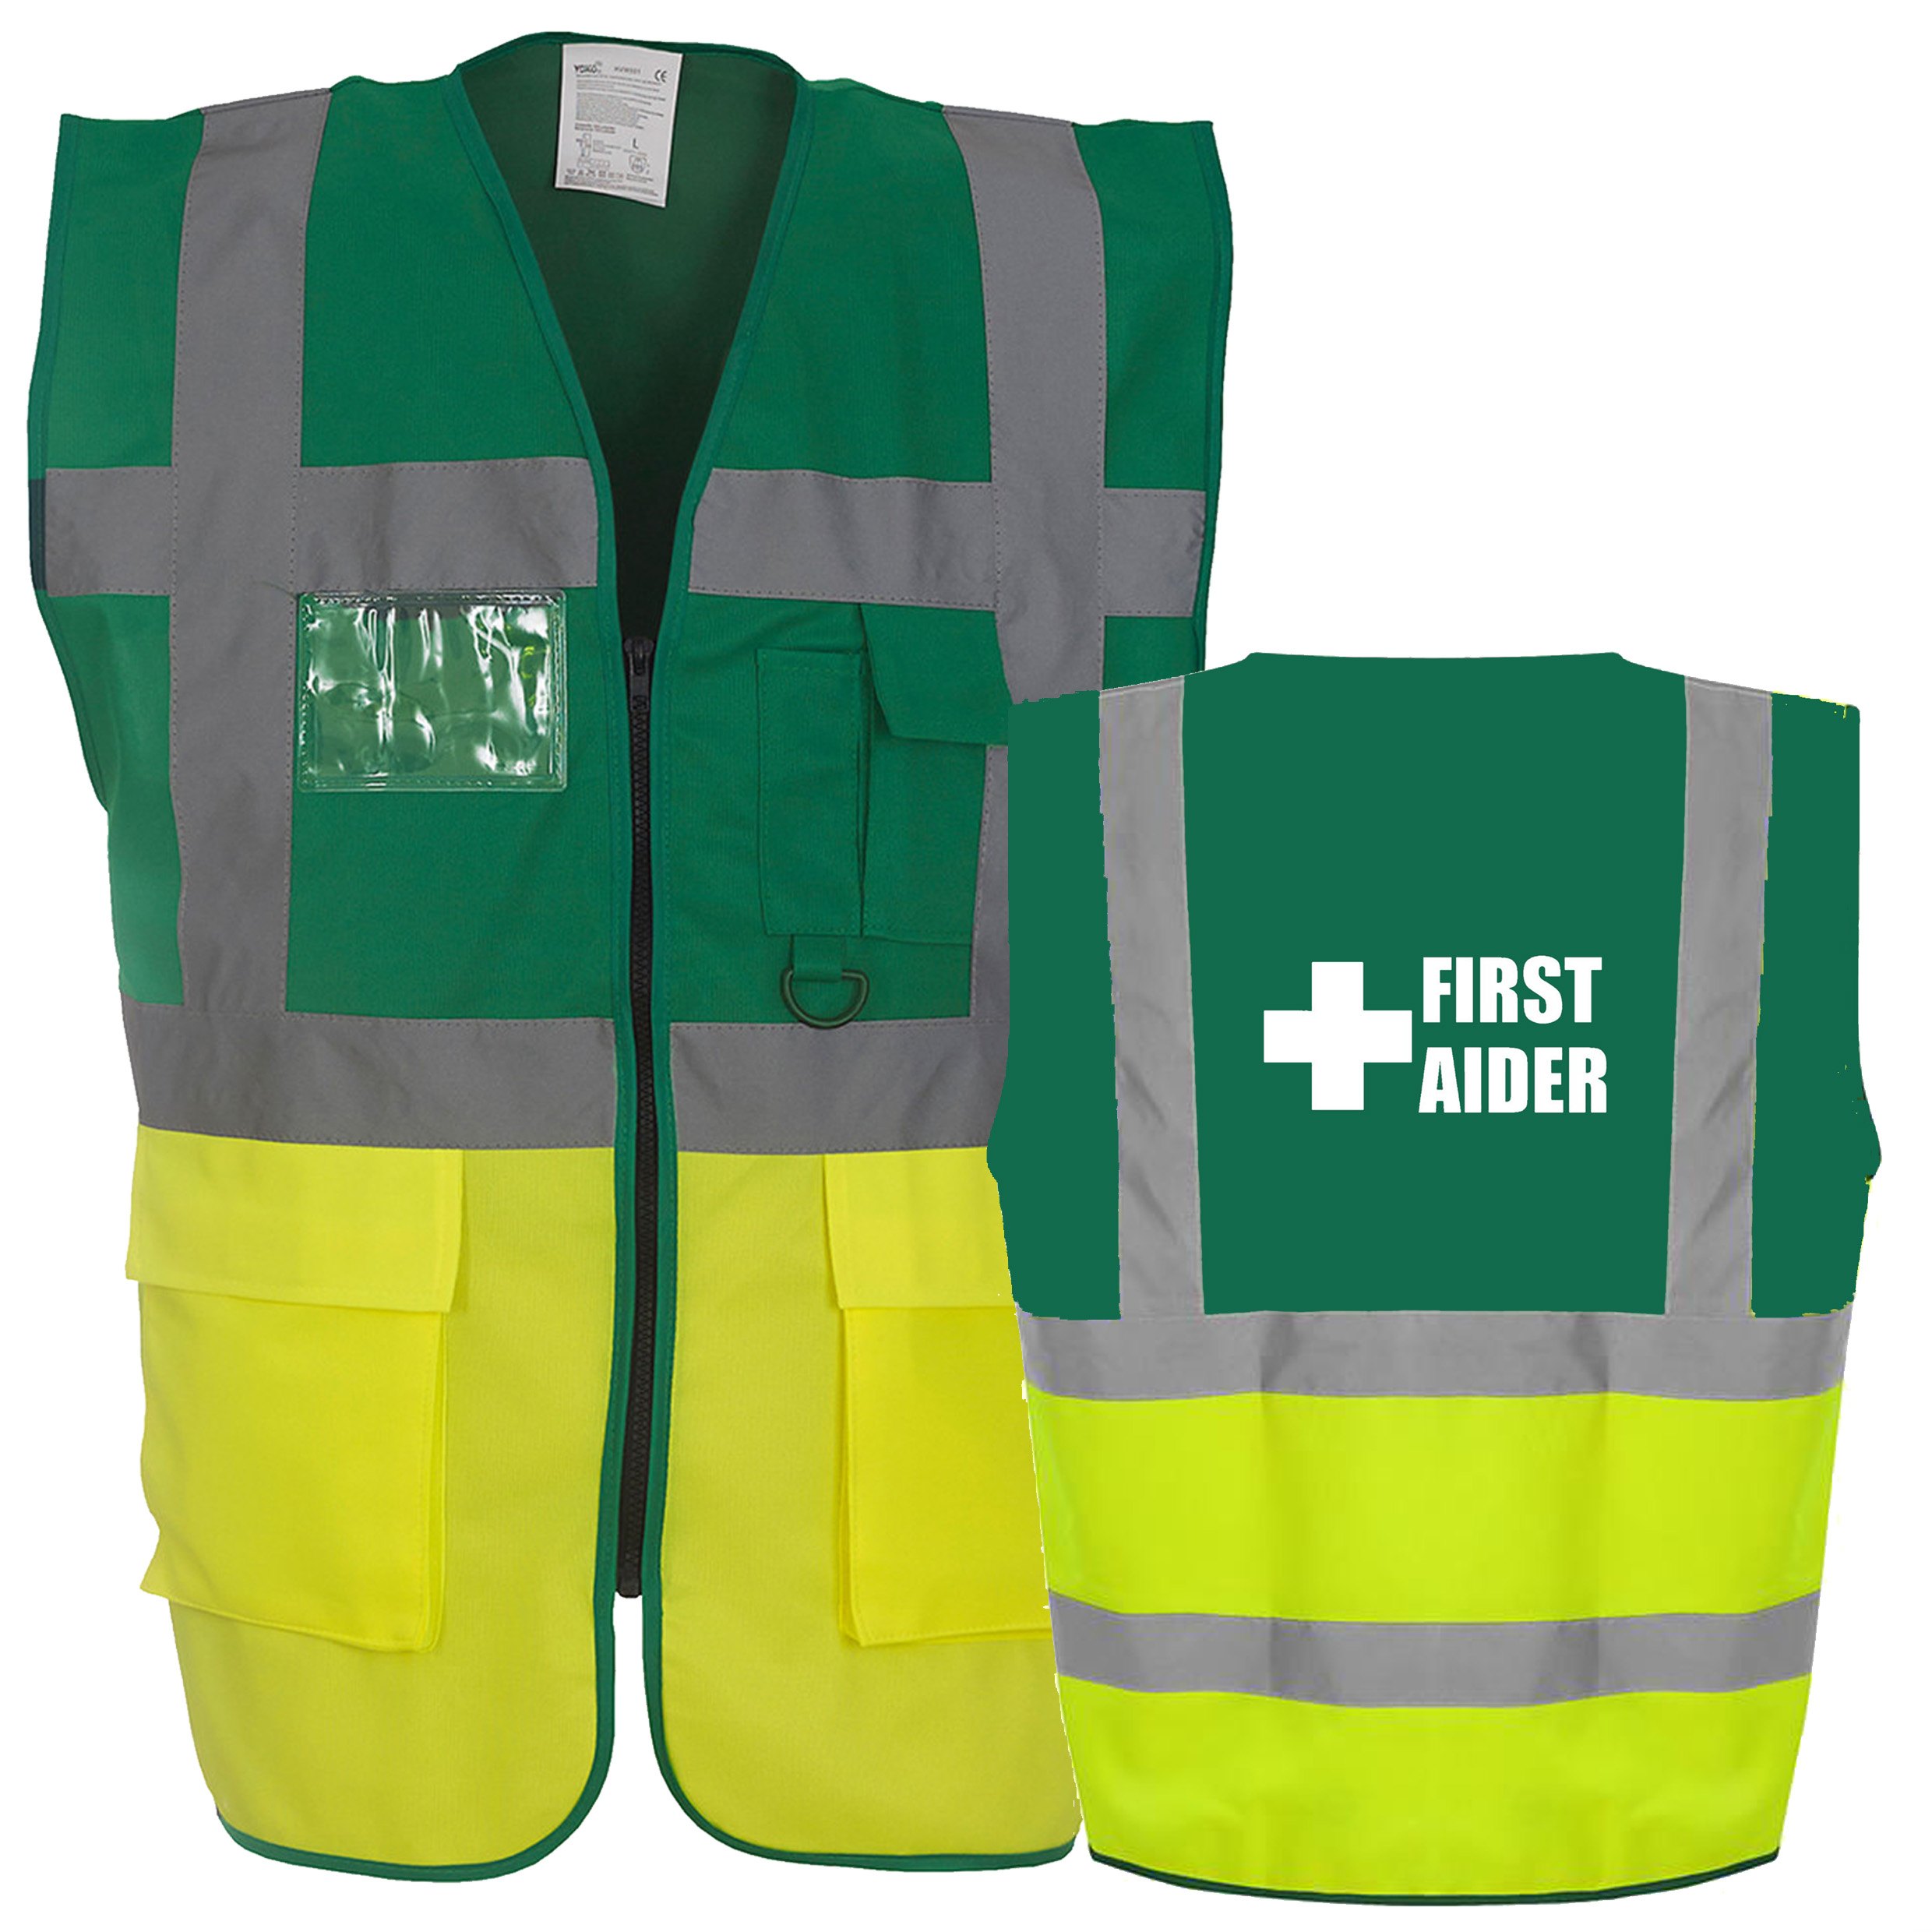 First aider Executive vest